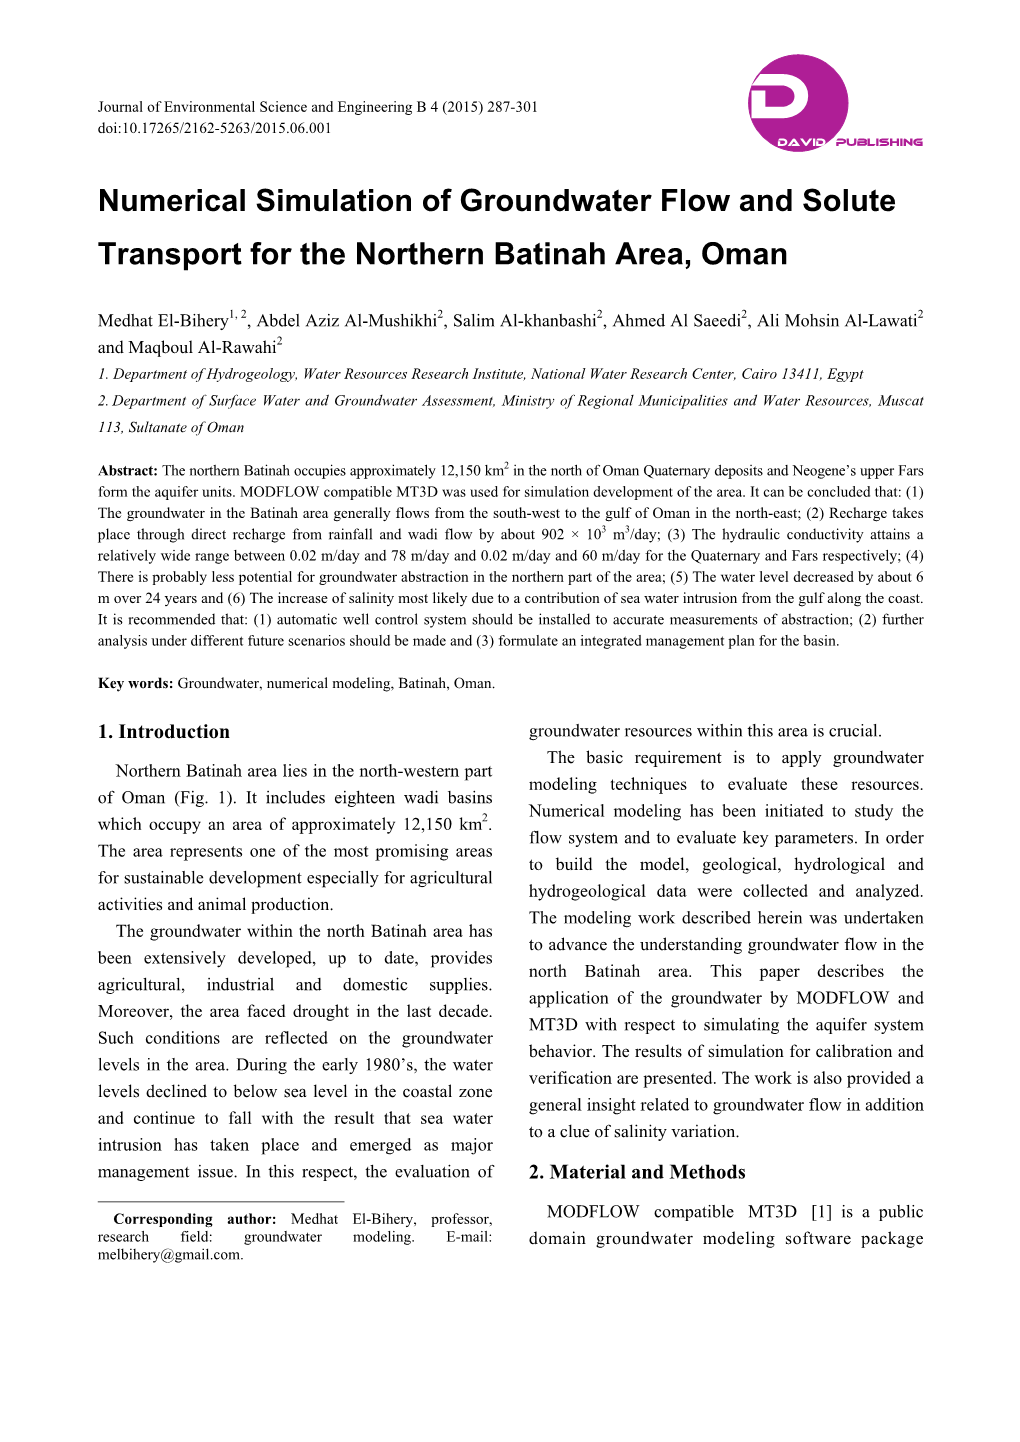 Numerical Simulation of Groundwater Flow and Solute Transport for the Northern Batinah Area, Oman